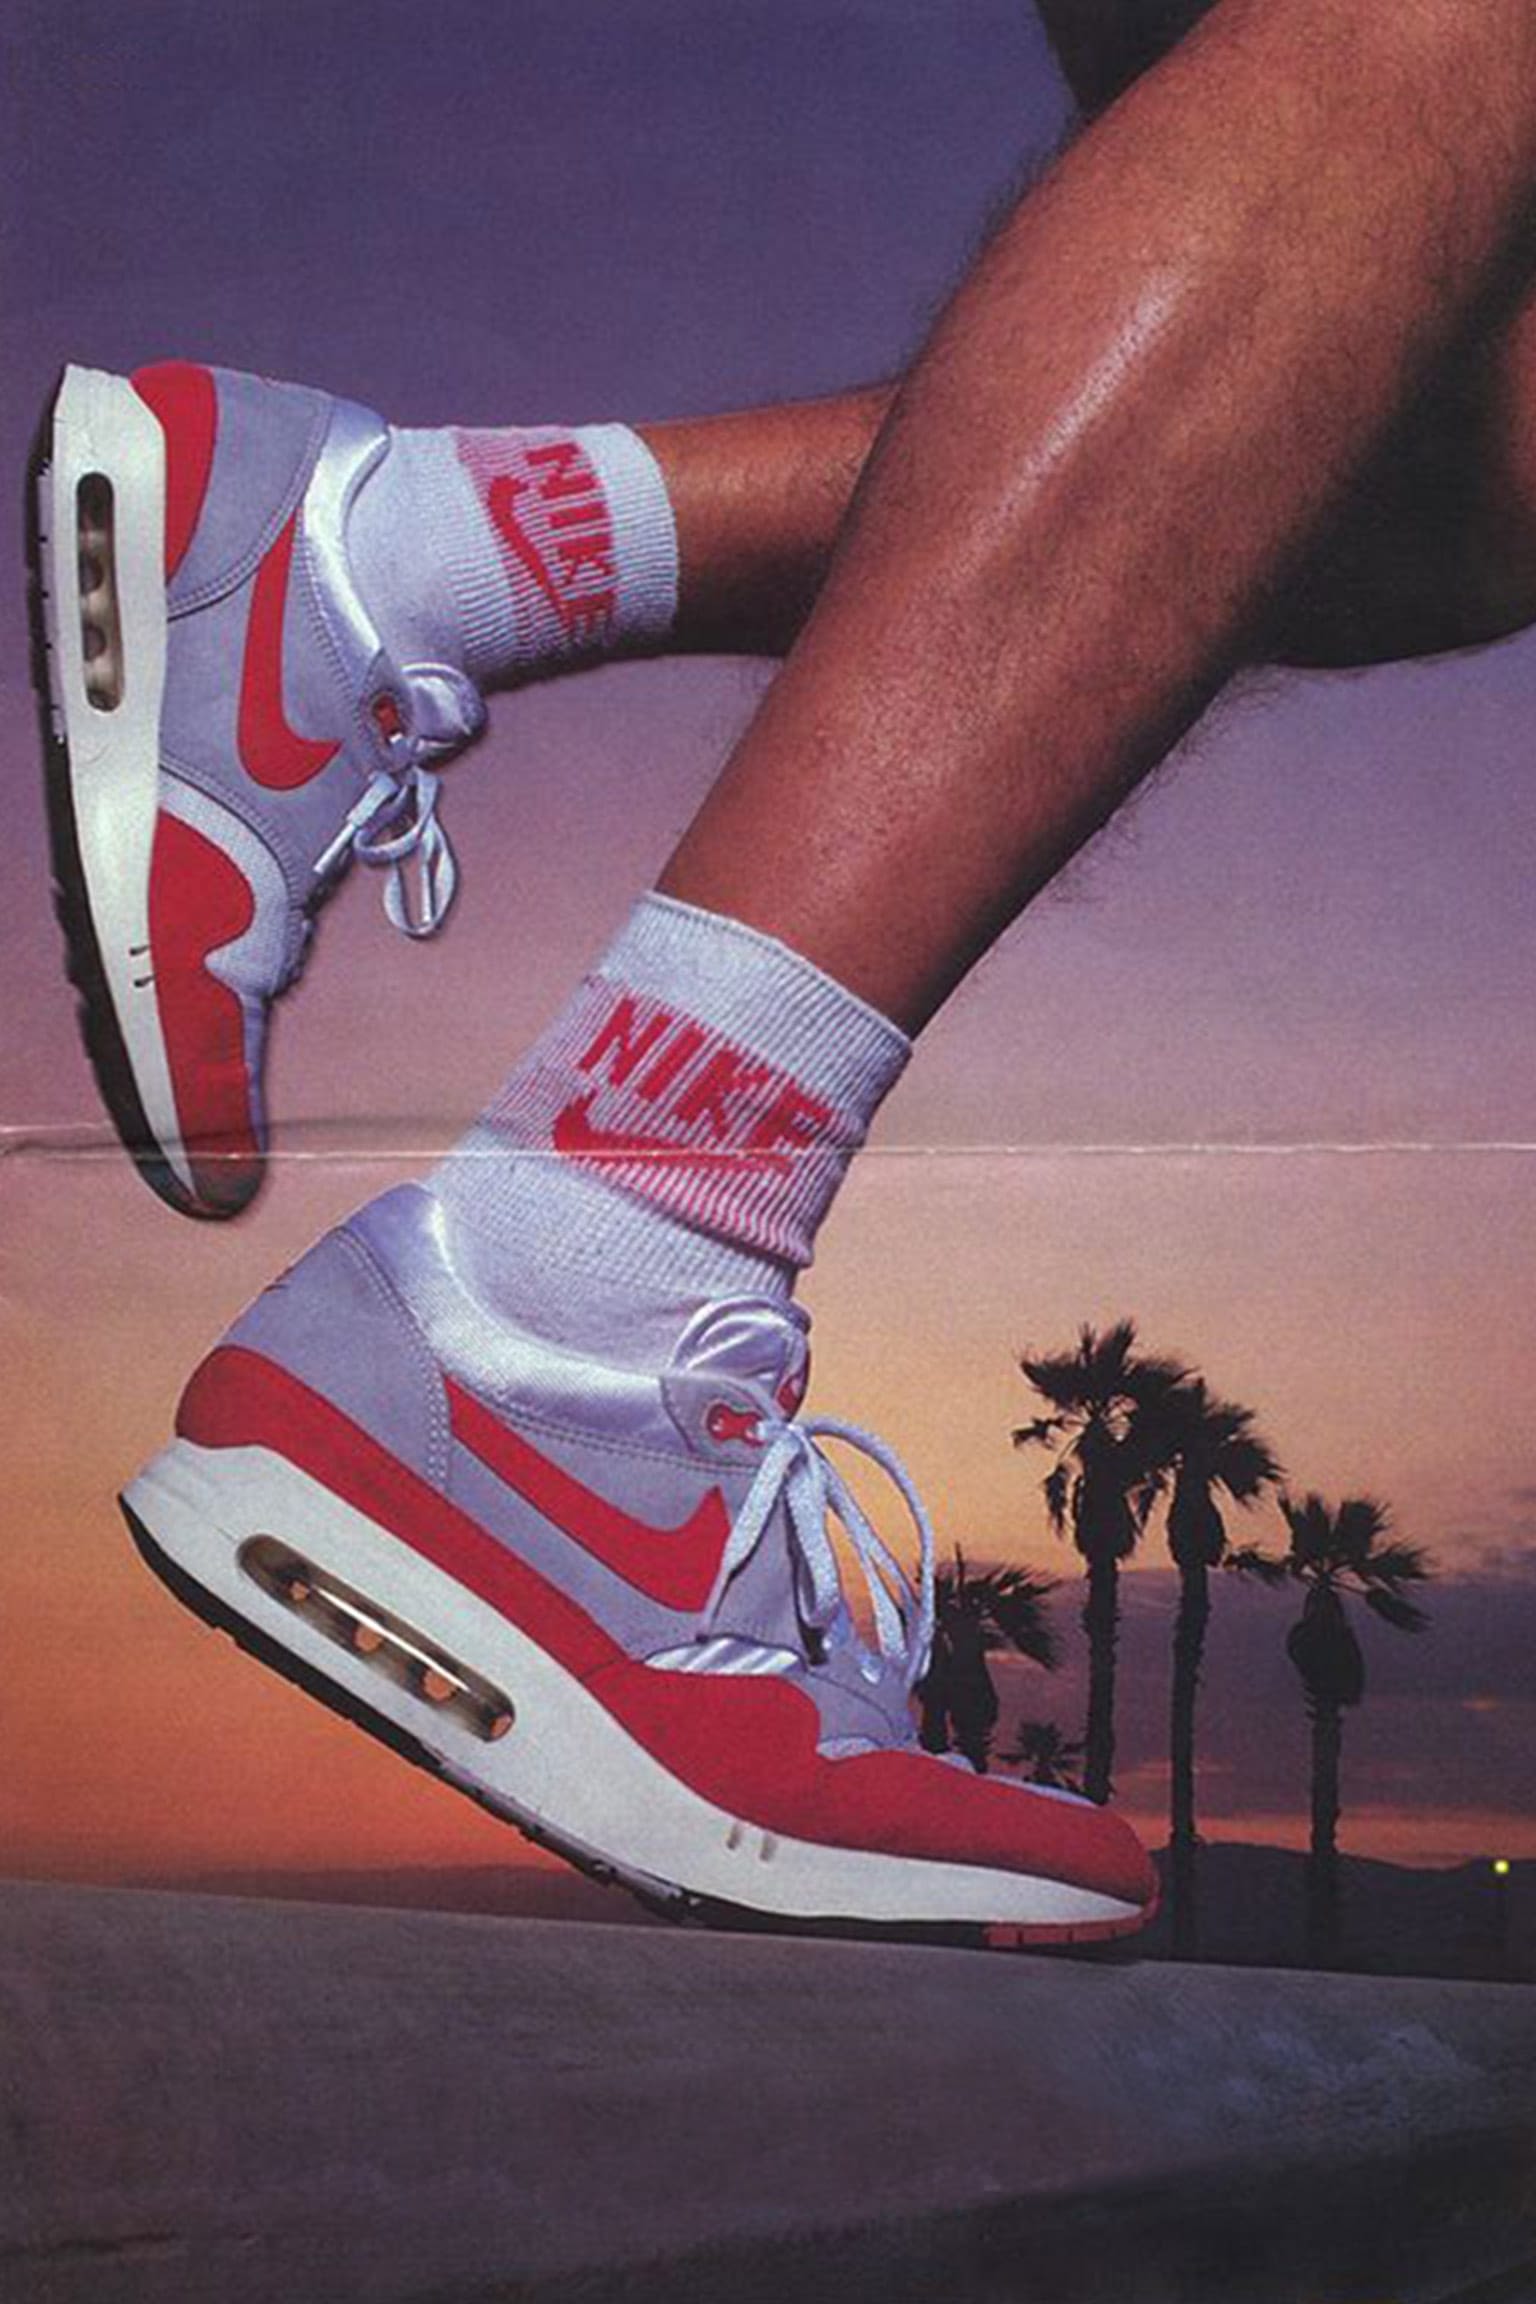 Nike Brought Back the OG Air Max 1